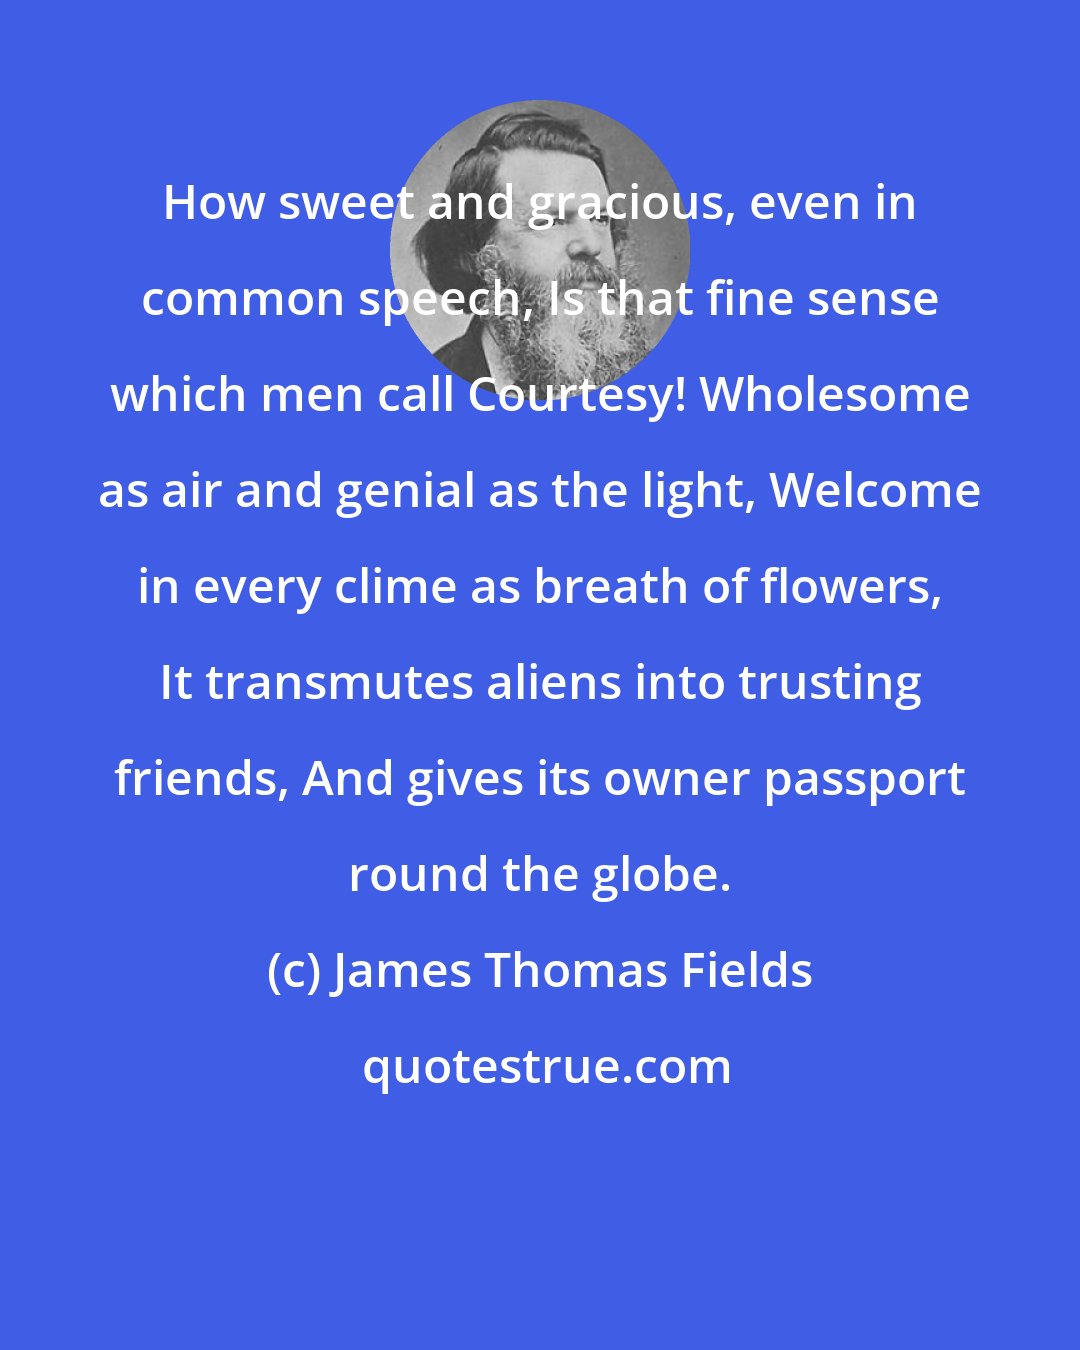 James Thomas Fields: How sweet and gracious, even in common speech, Is that fine sense which men call Courtesy! Wholesome as air and genial as the light, Welcome in every clime as breath of flowers, It transmutes aliens into trusting friends, And gives its owner passport round the globe.